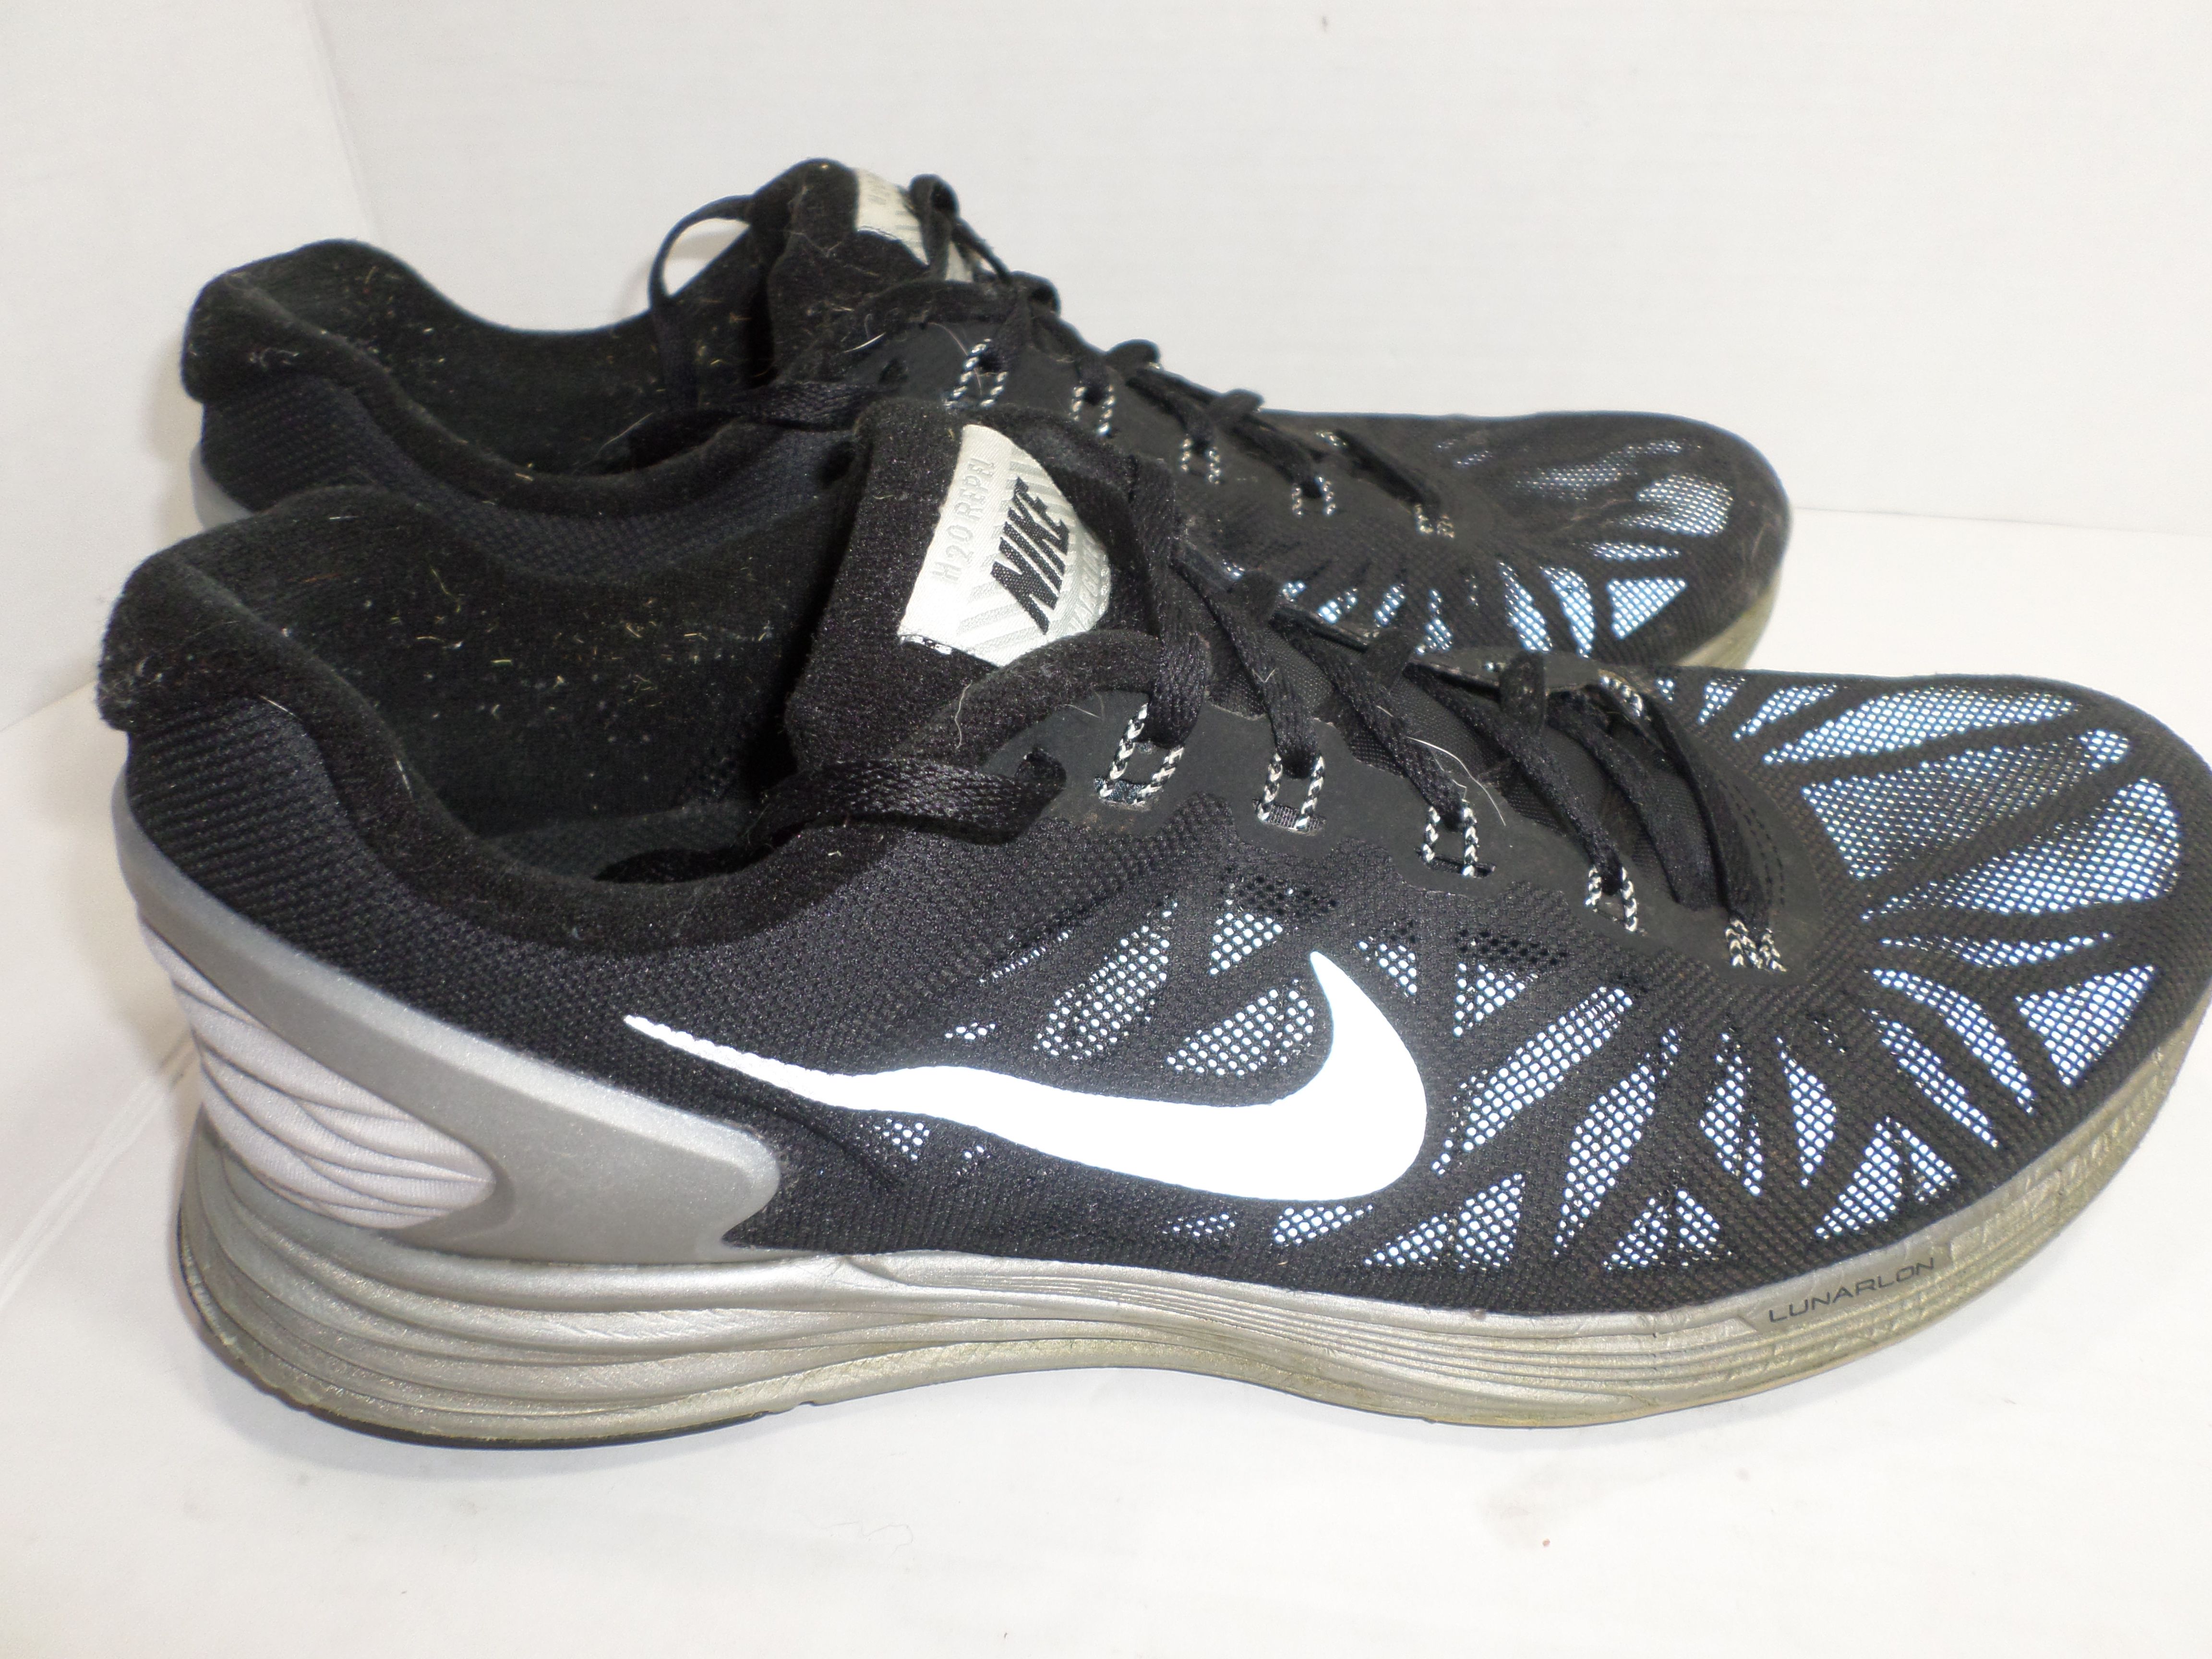 Ciencias Retocar Polo Nike Lunarglide 6 Flash H2O Repel 683651-001 black & silver running shoes  mens 10.5 for Sale in Independence, OR - OfferUp